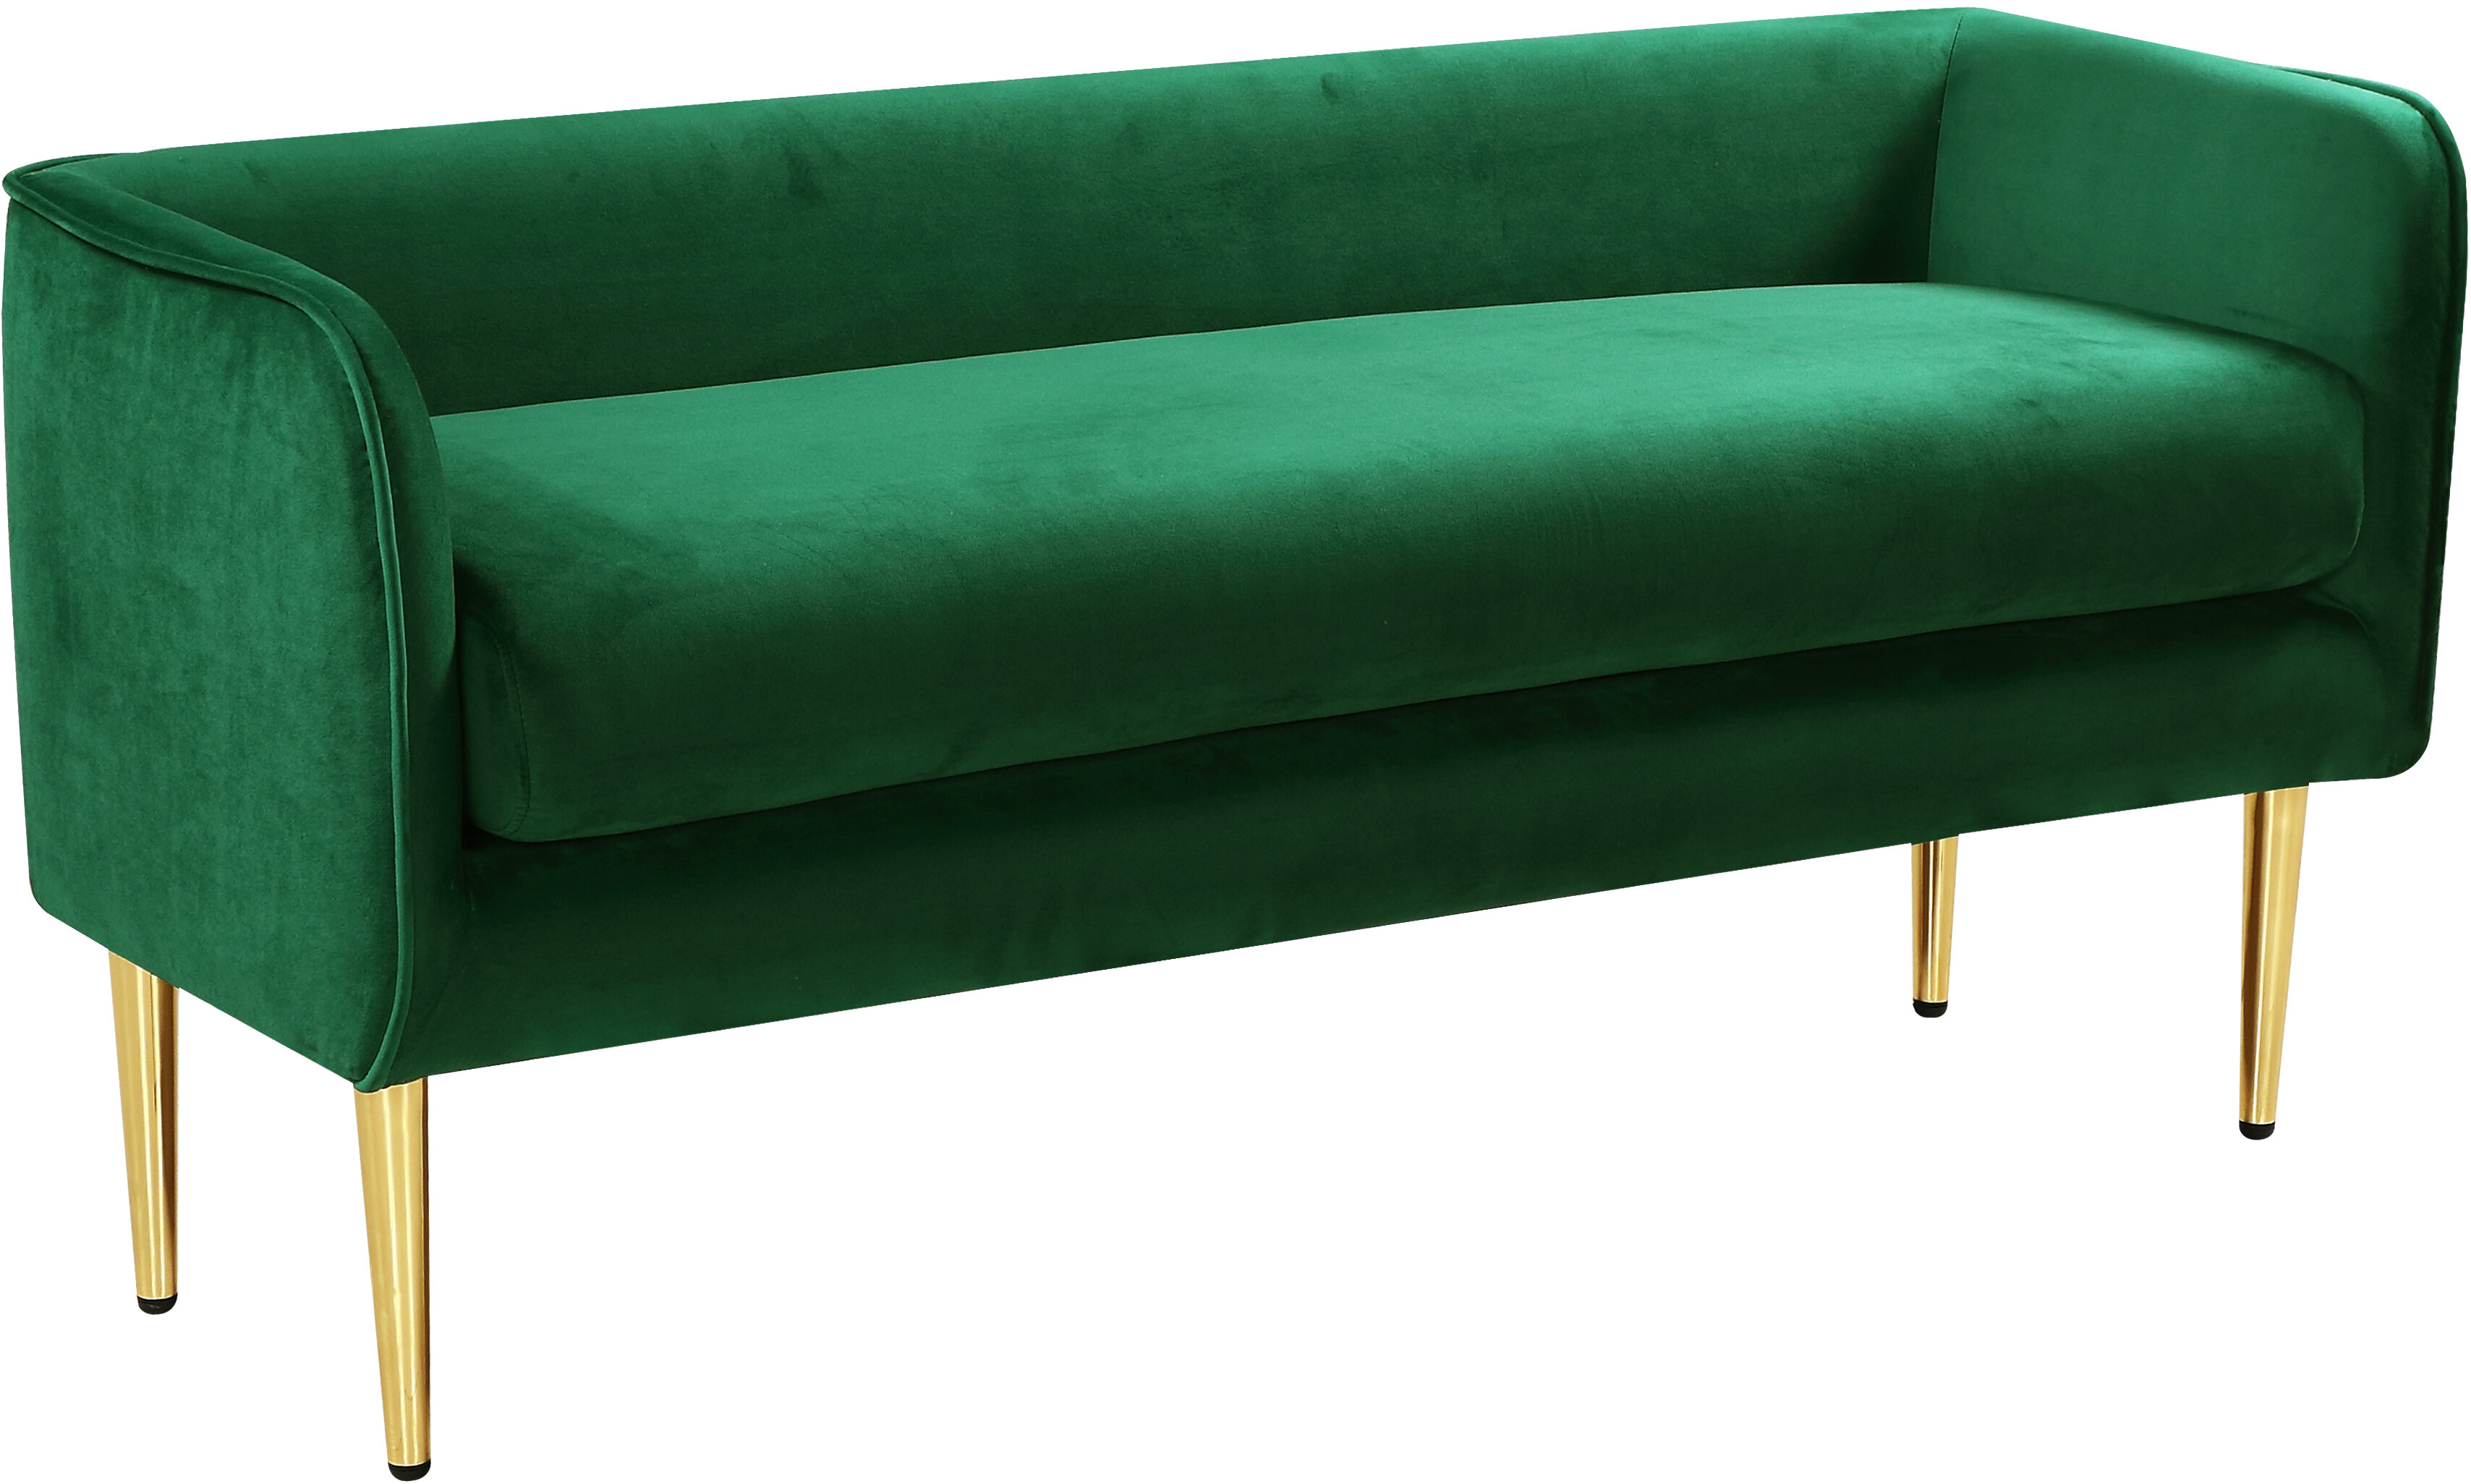 Bedroom Green Benches You Ll Love In 2021 Wayfair